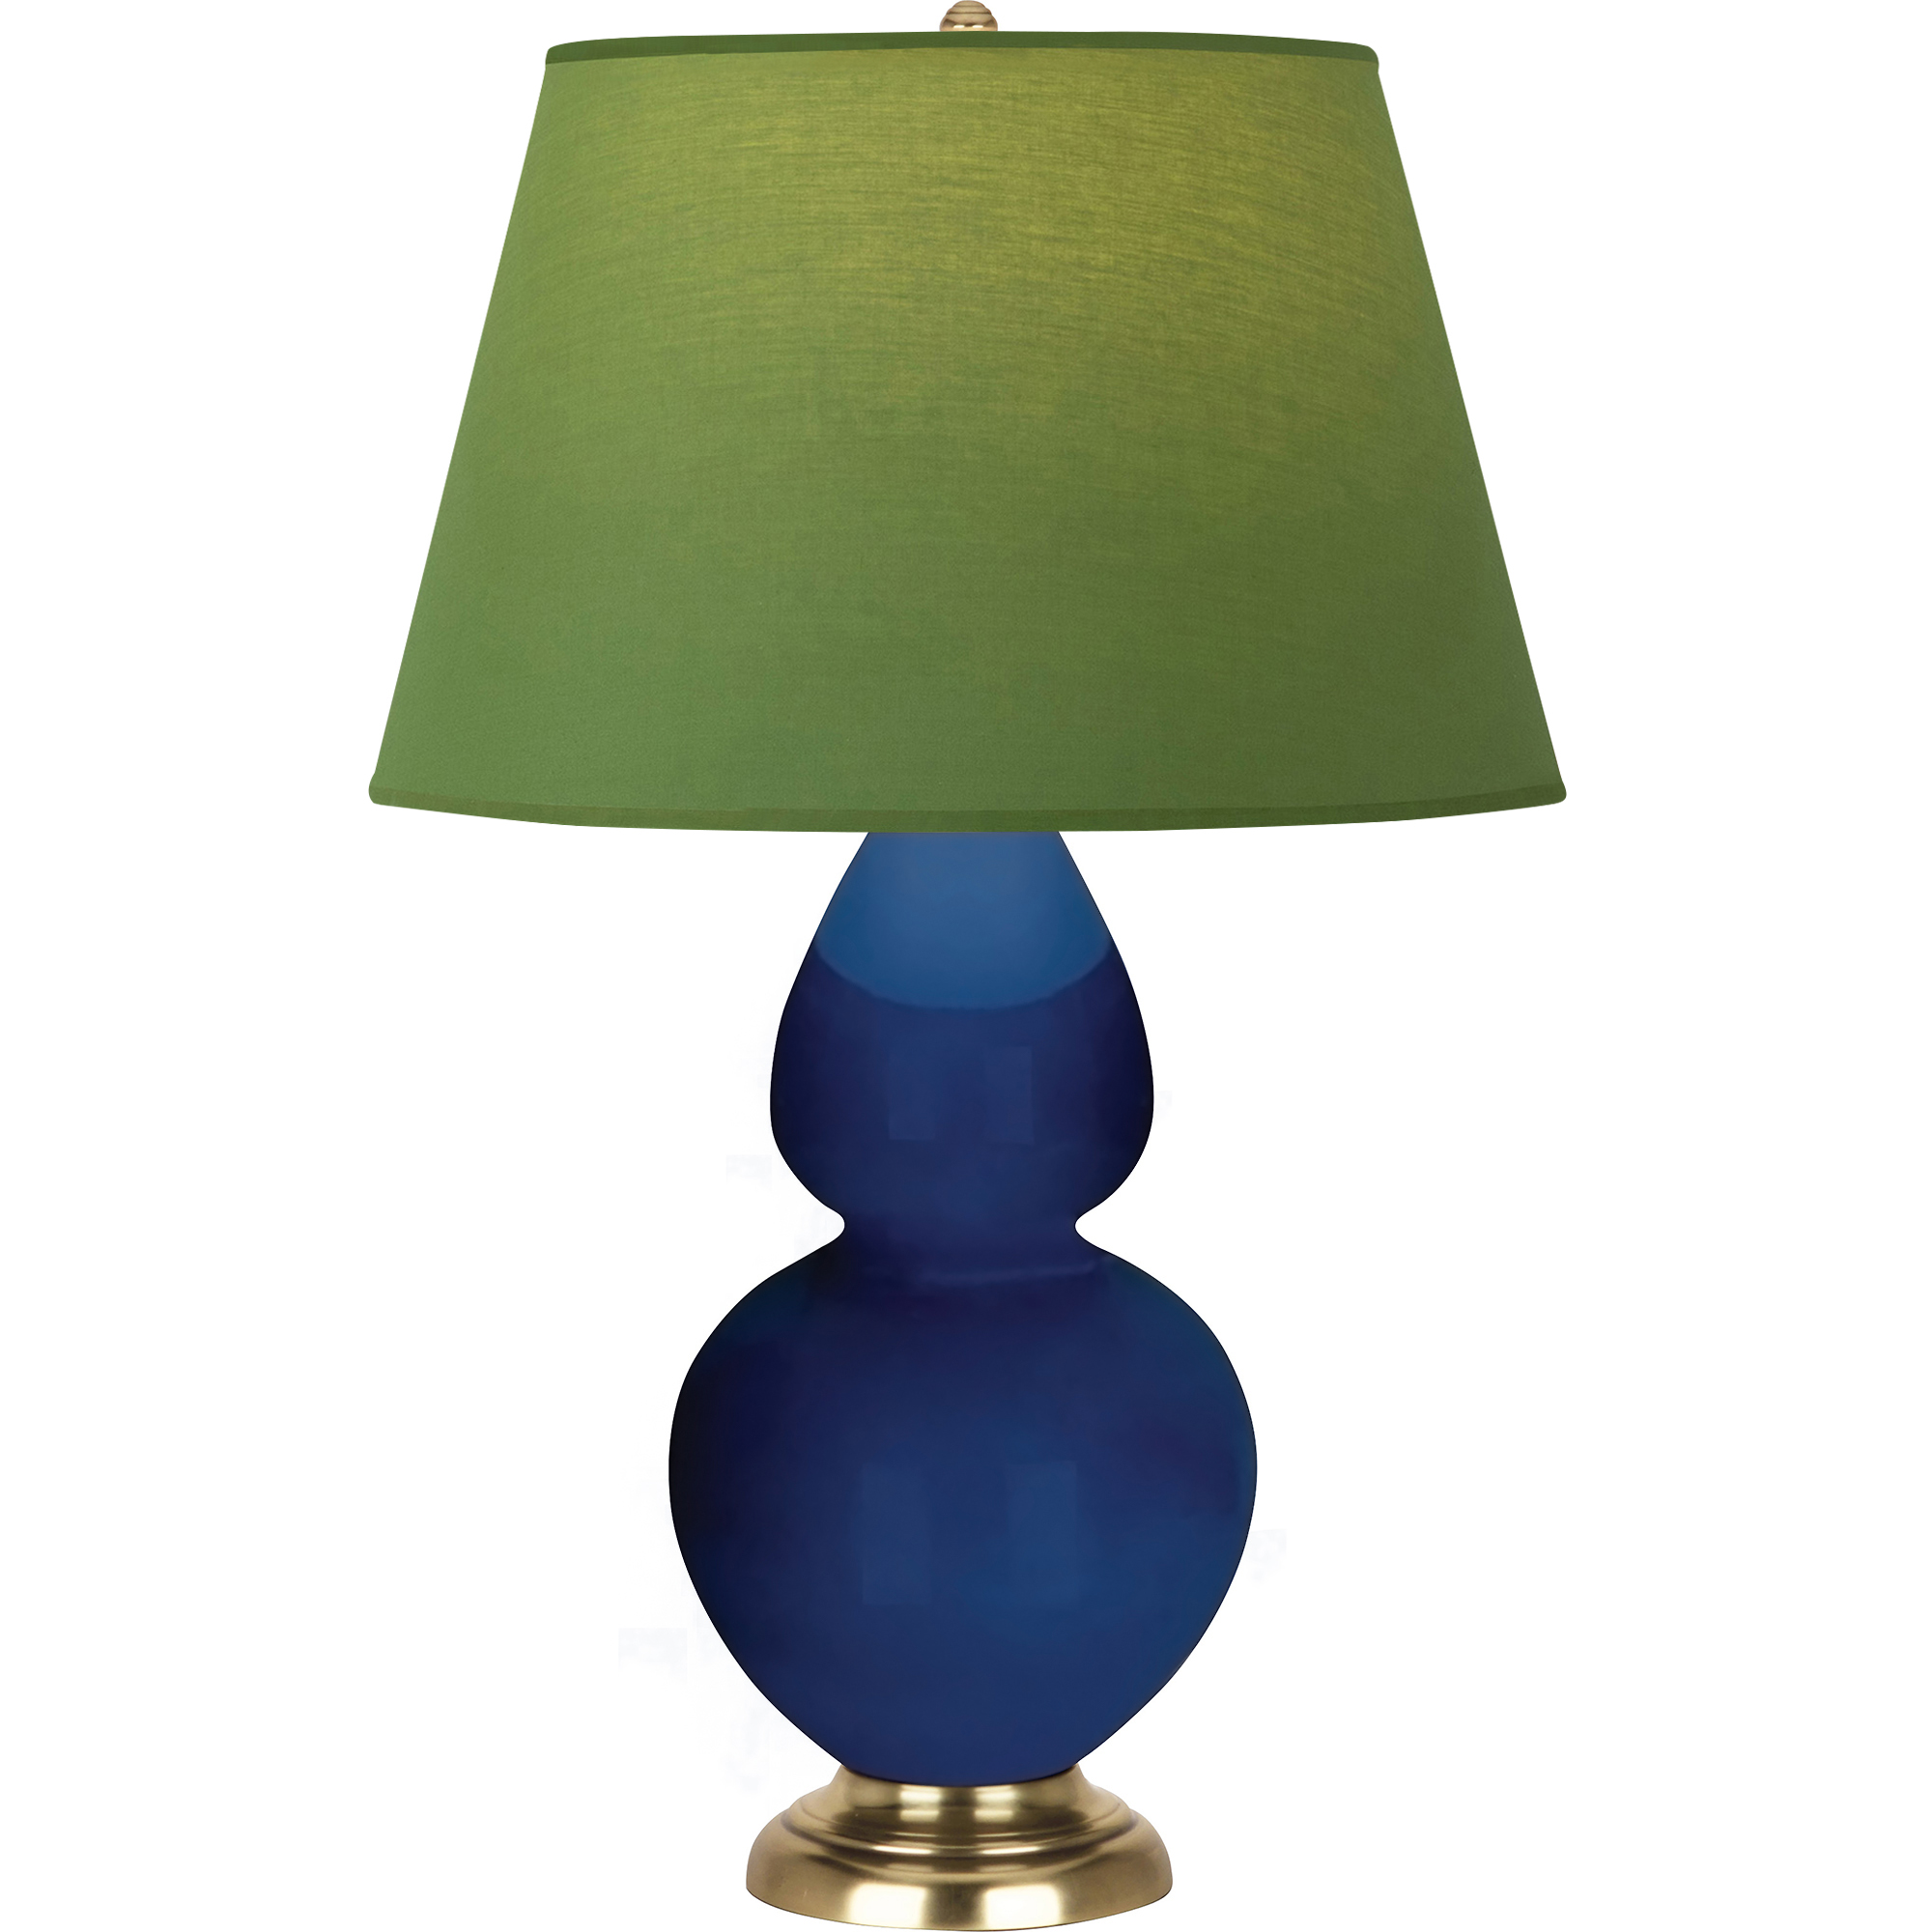 Double Gourd Table Lamp Style #CT20G